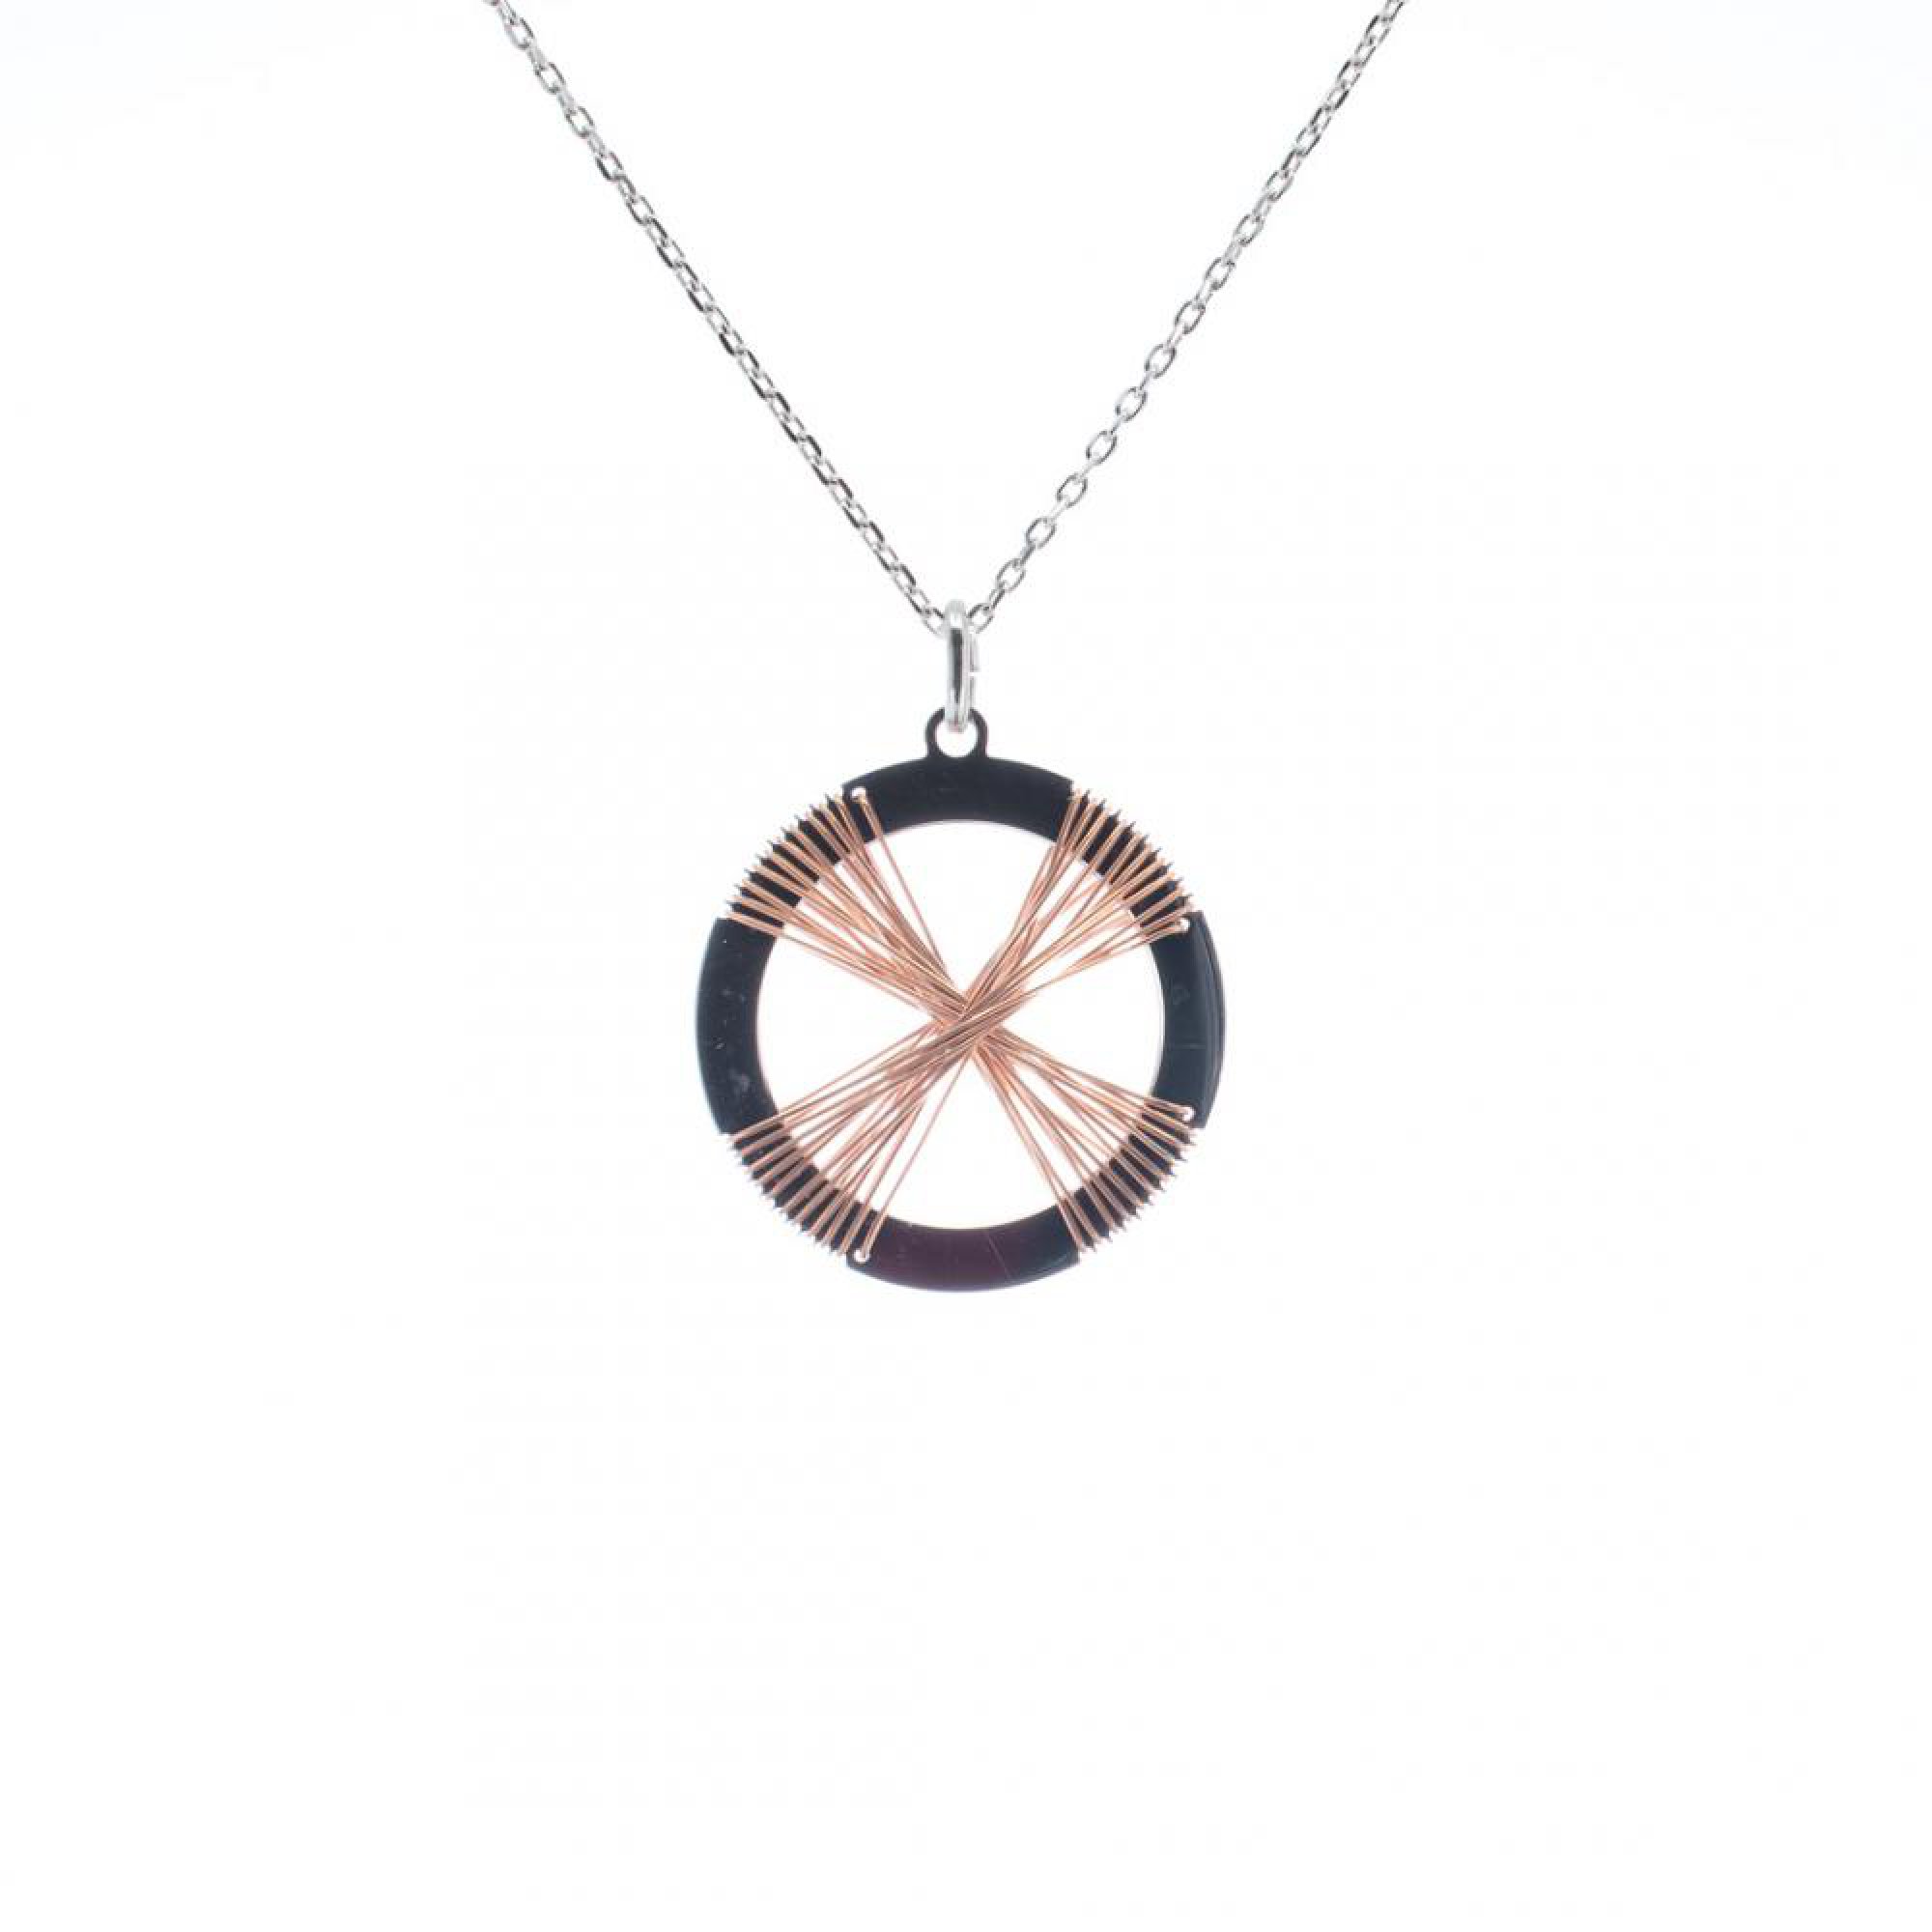 Geometric necklace with rose gold details